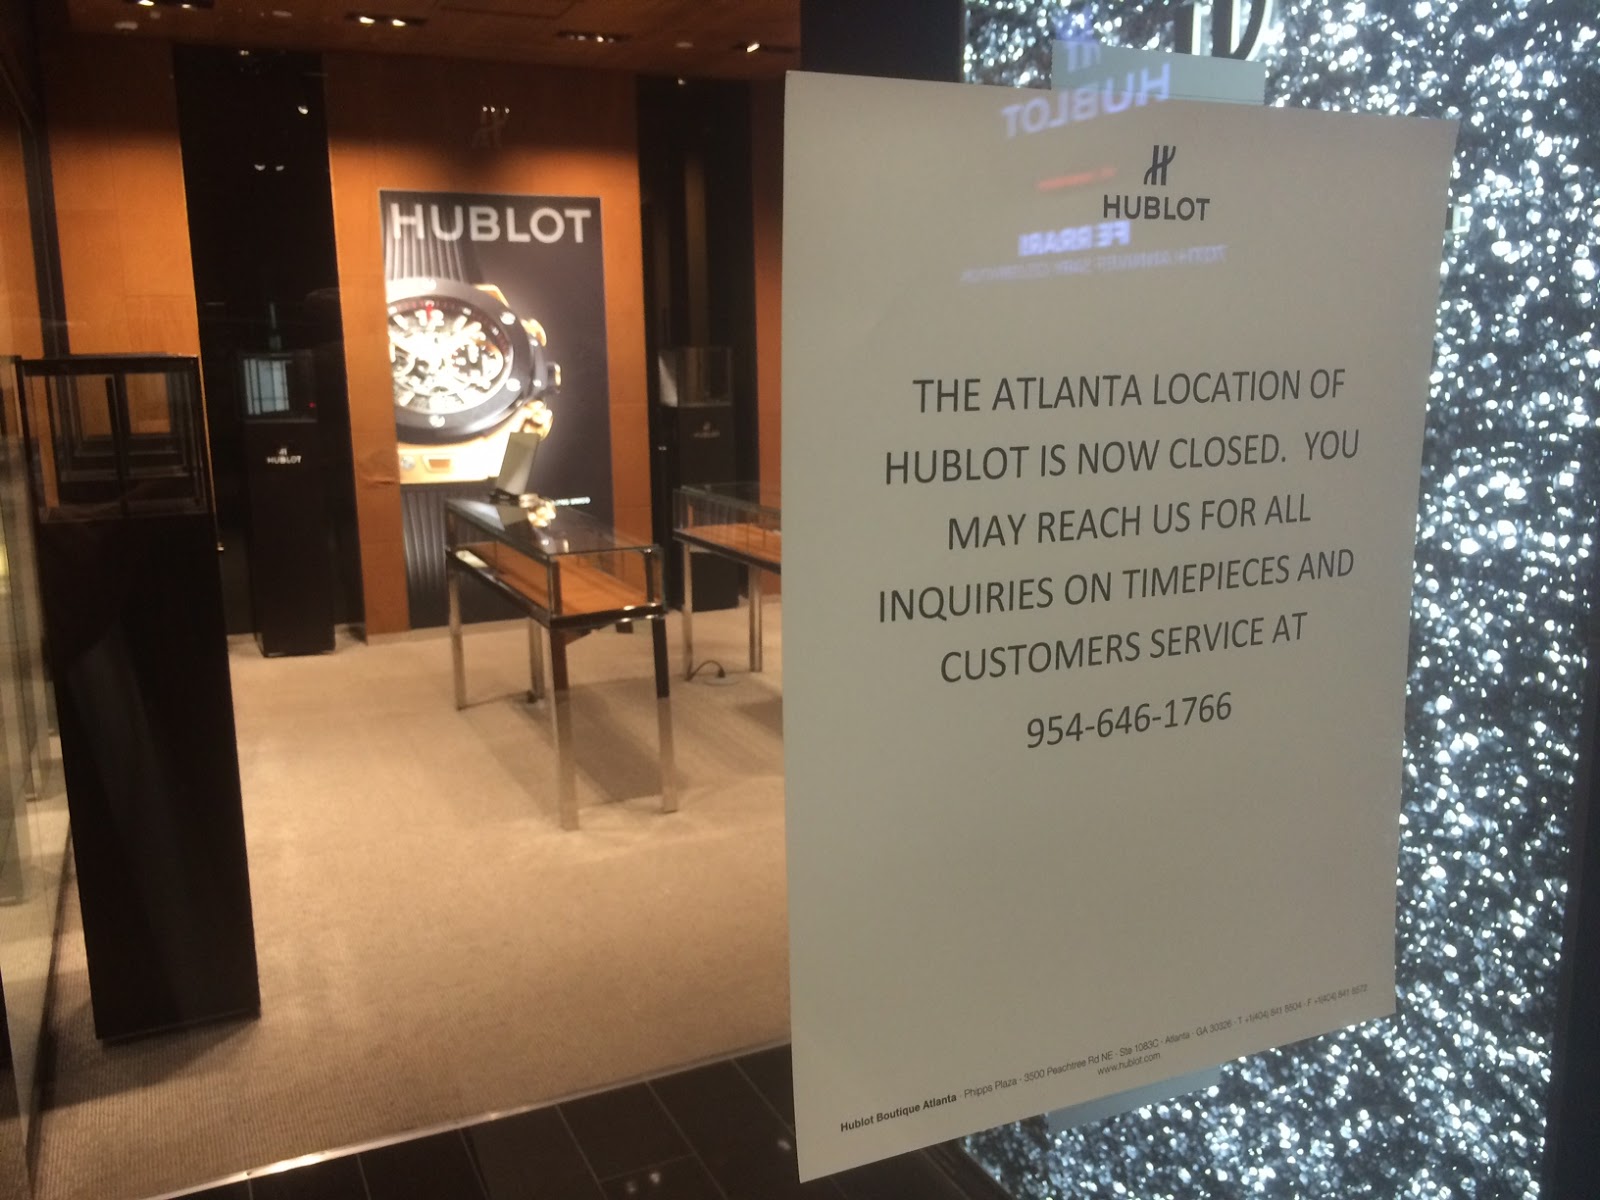 Tomorrow's News - Atlanta: [EXCLUSIVE] Gucci to Get More Grand Plaza as Time Out For Hublot